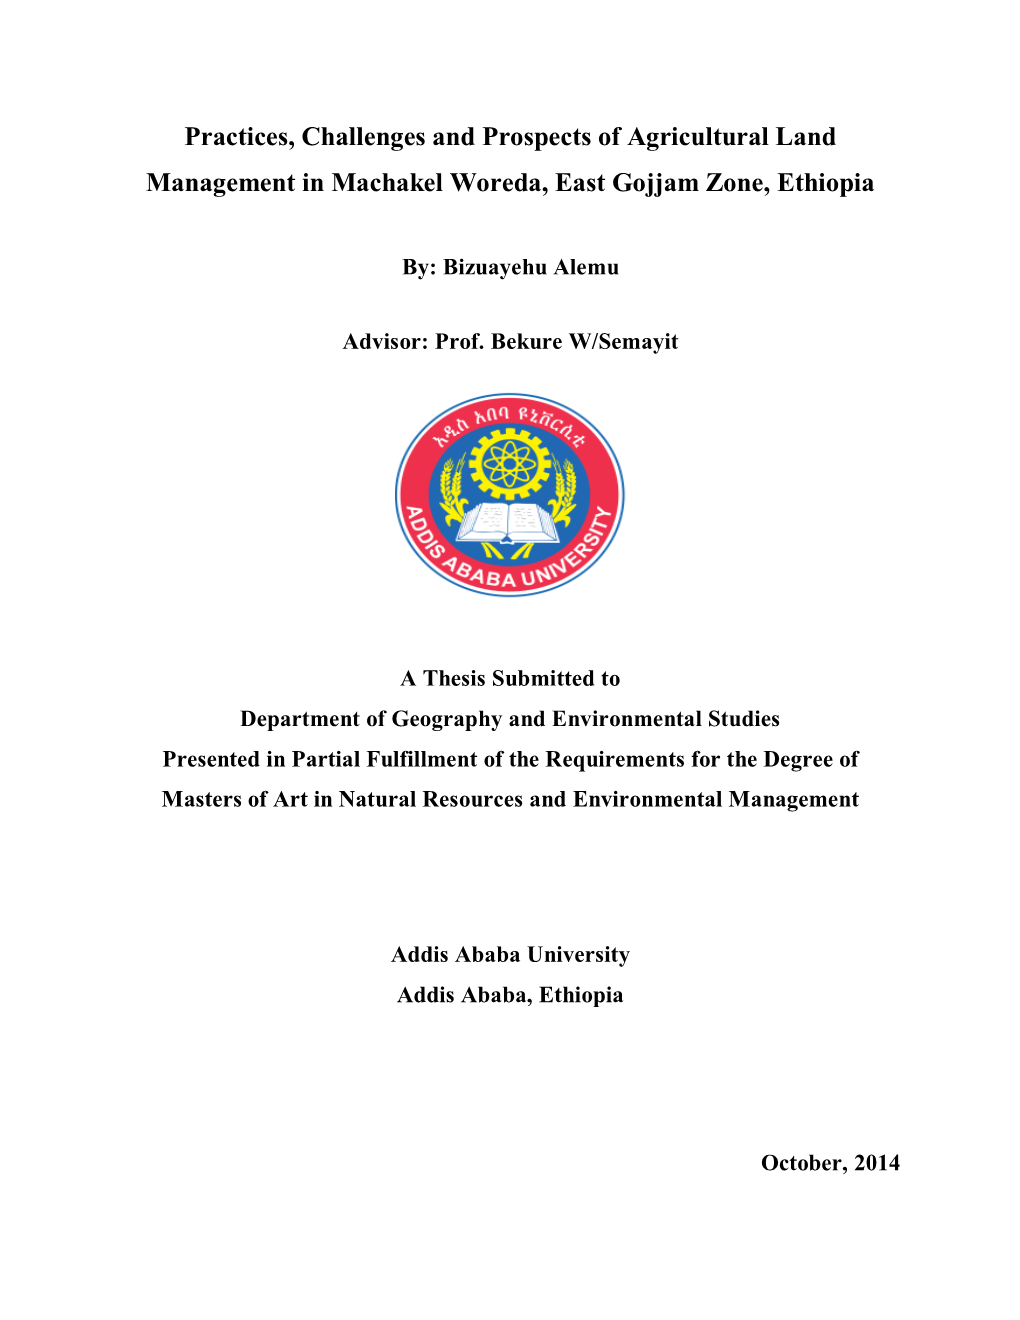 Practices, Challenges and Prospects of Agricultural Land Management in Machakel Woreda, East Gojjam Zone, Ethiopia